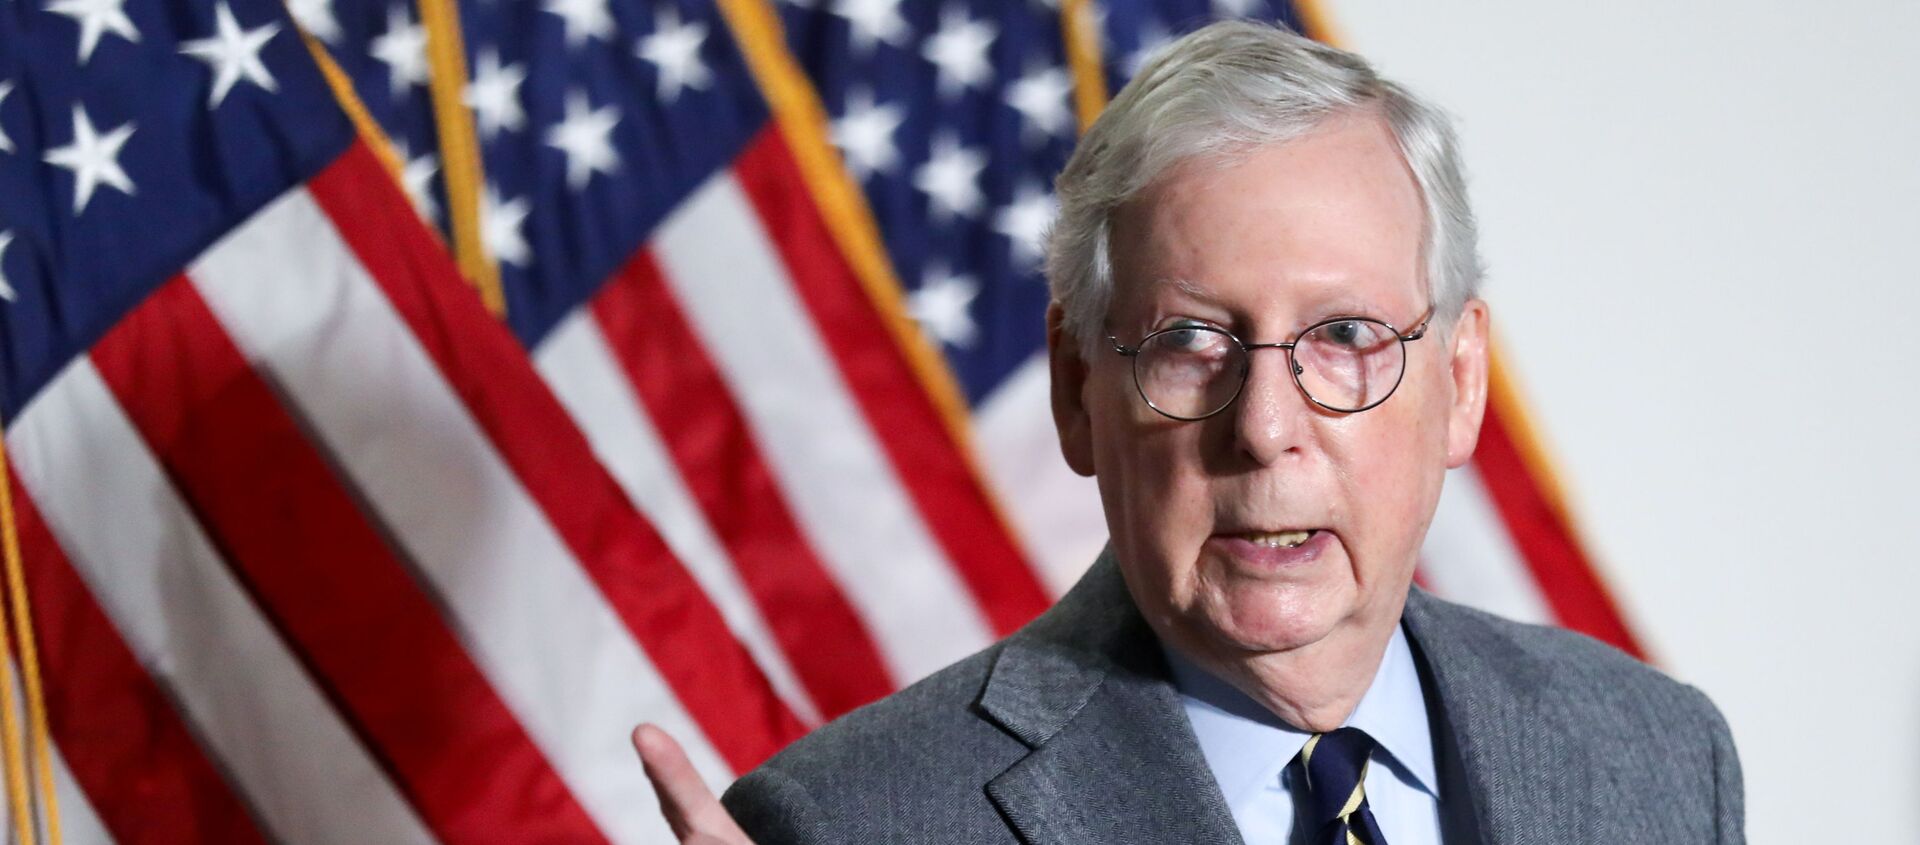 U.S. Senate Minority Leader Mitch McConnell (R-KY) speaks to reporters after the weekly Republican caucus policy luncheon on Capitol Hill in Washington, U.S., January 26, 2021. - Sputnik International, 1920